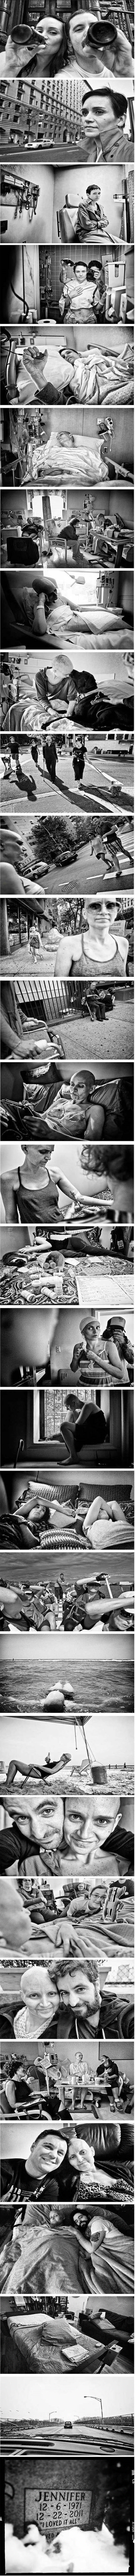 Photographer takes a picture every stage his girlfriend went through in her battle with cancer